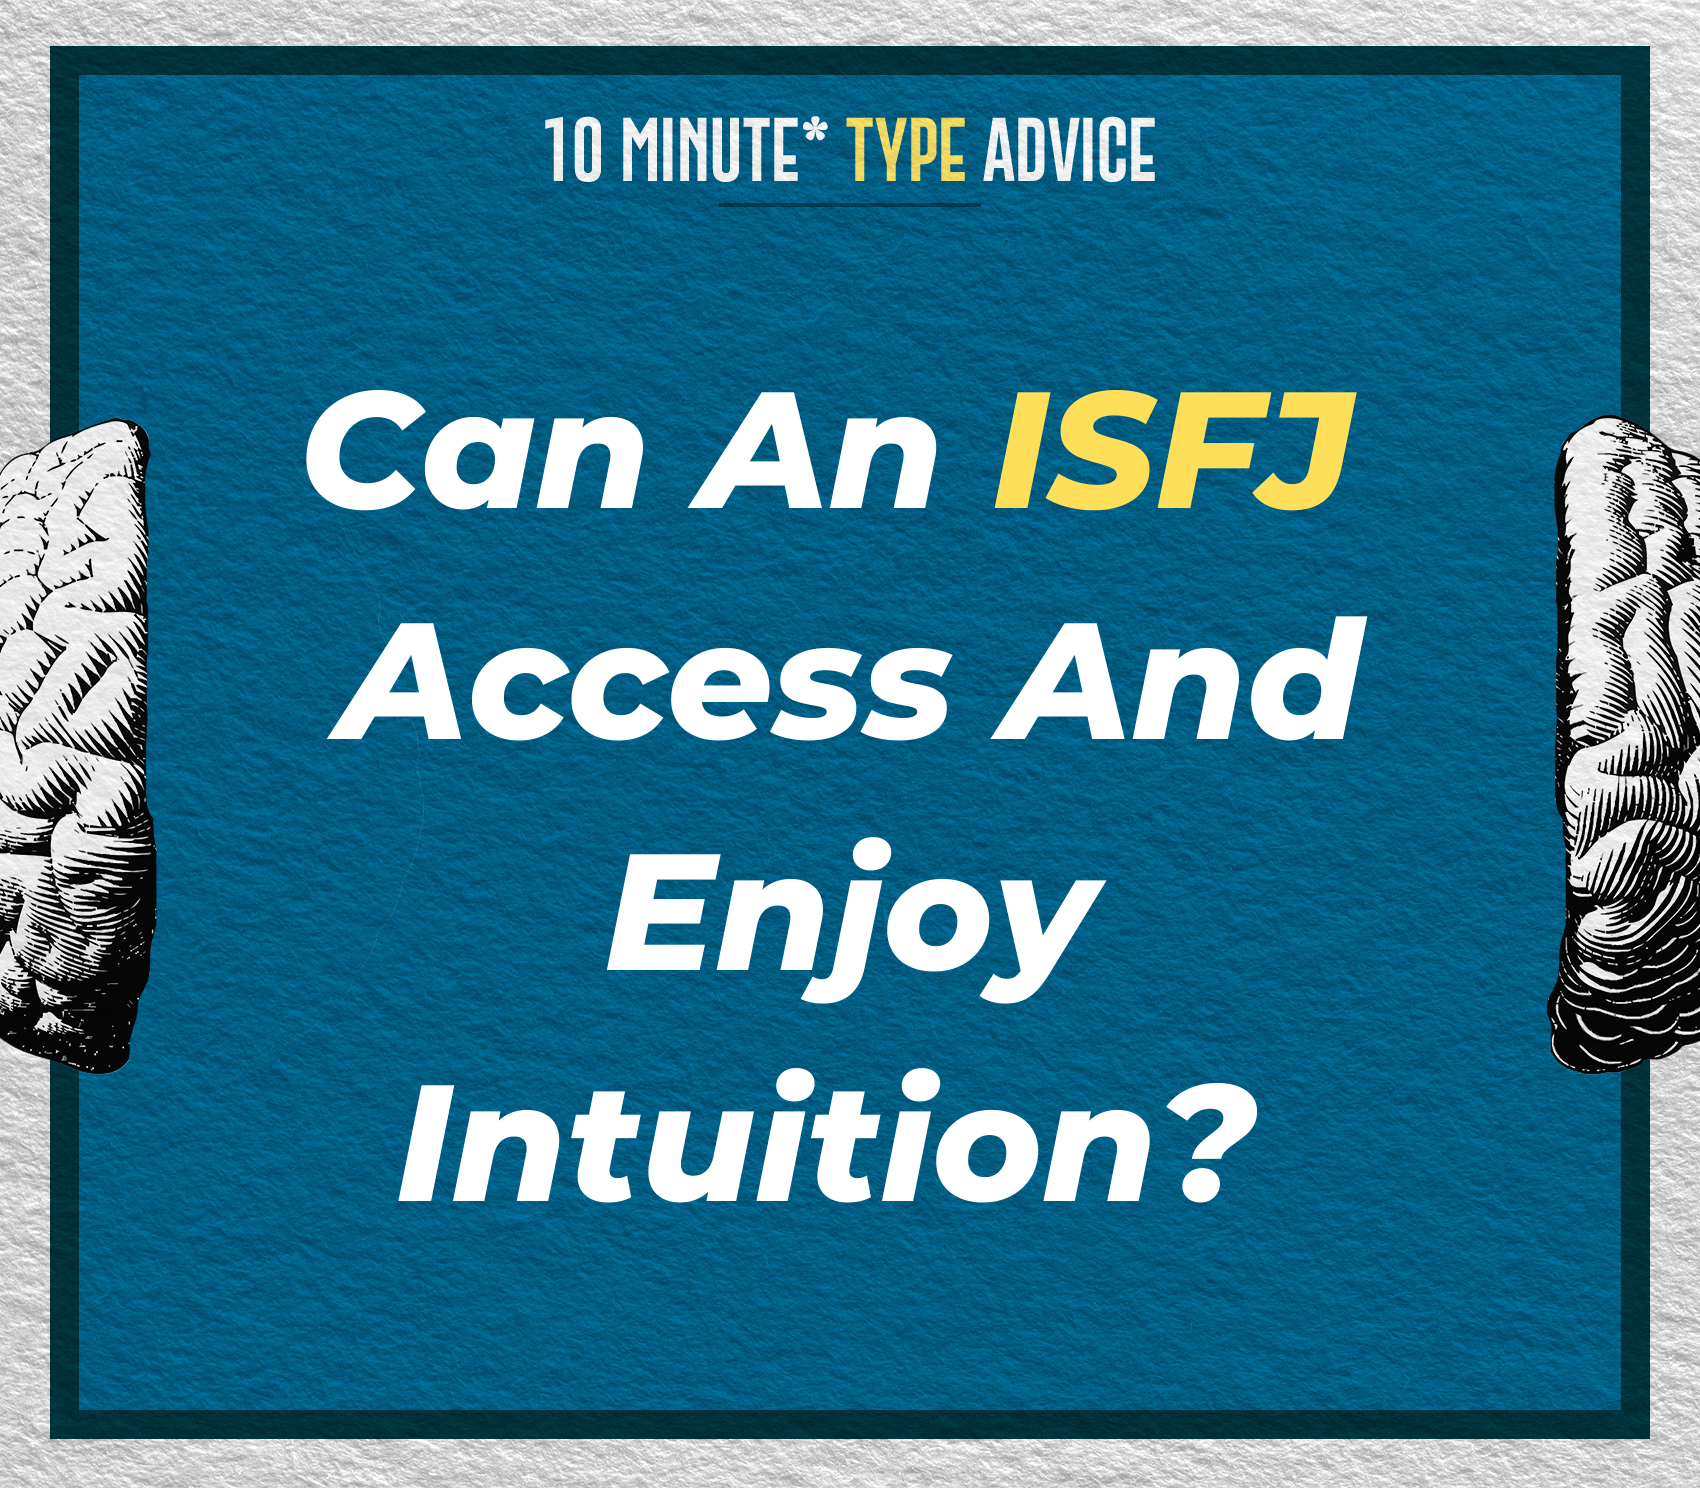 Can An ISFJ Access And Enjoy Intuition? | 10 Min Type Advice | S01:E06